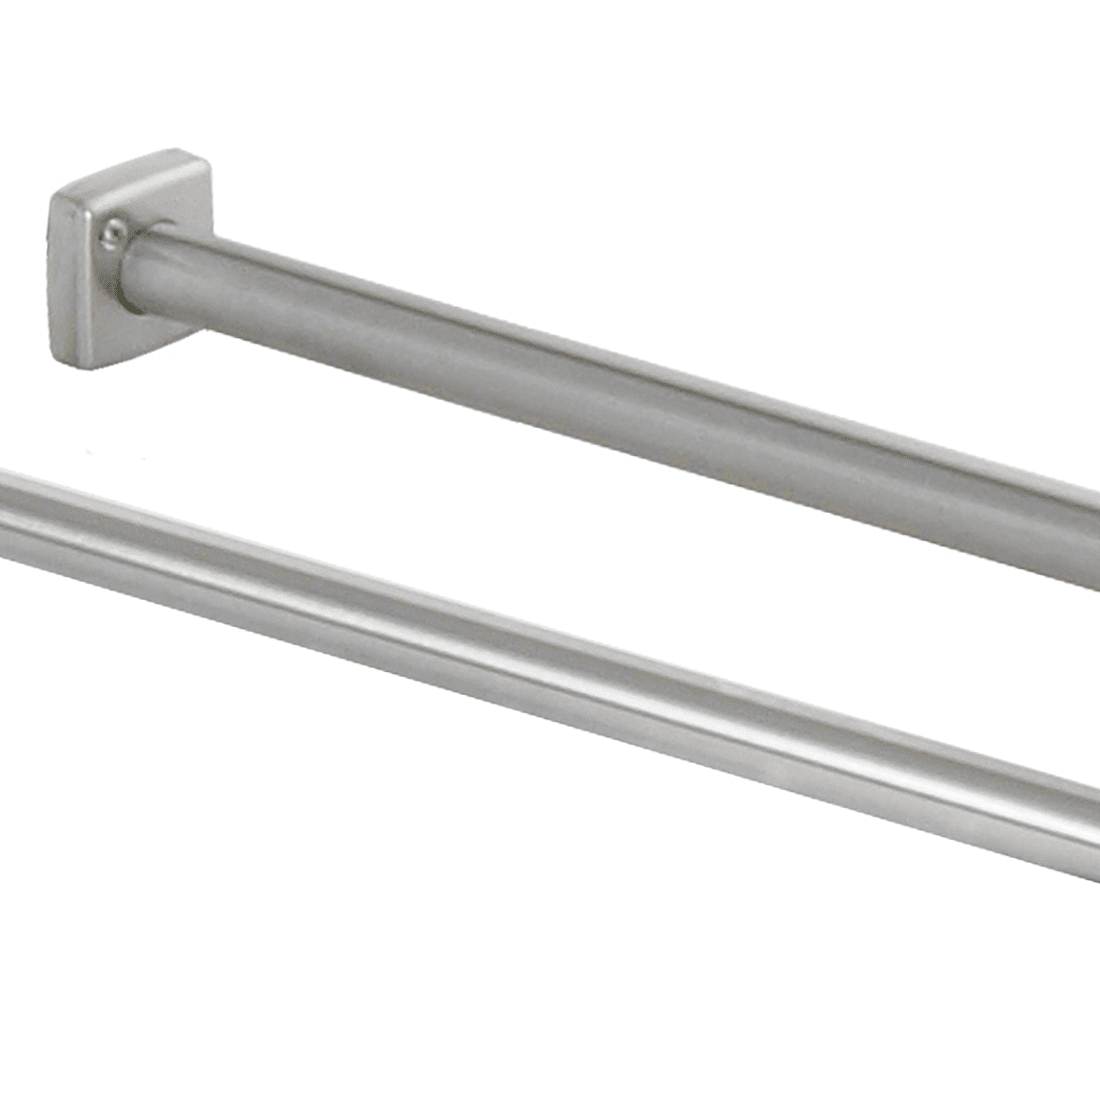 1-1/4 Diameter x 60 Length Satin Finish Bobrick 6047x60 ClassicSeries 304 Stainless Steel Extra Heavy Duty Shower Curtain Rod with Square End Flange